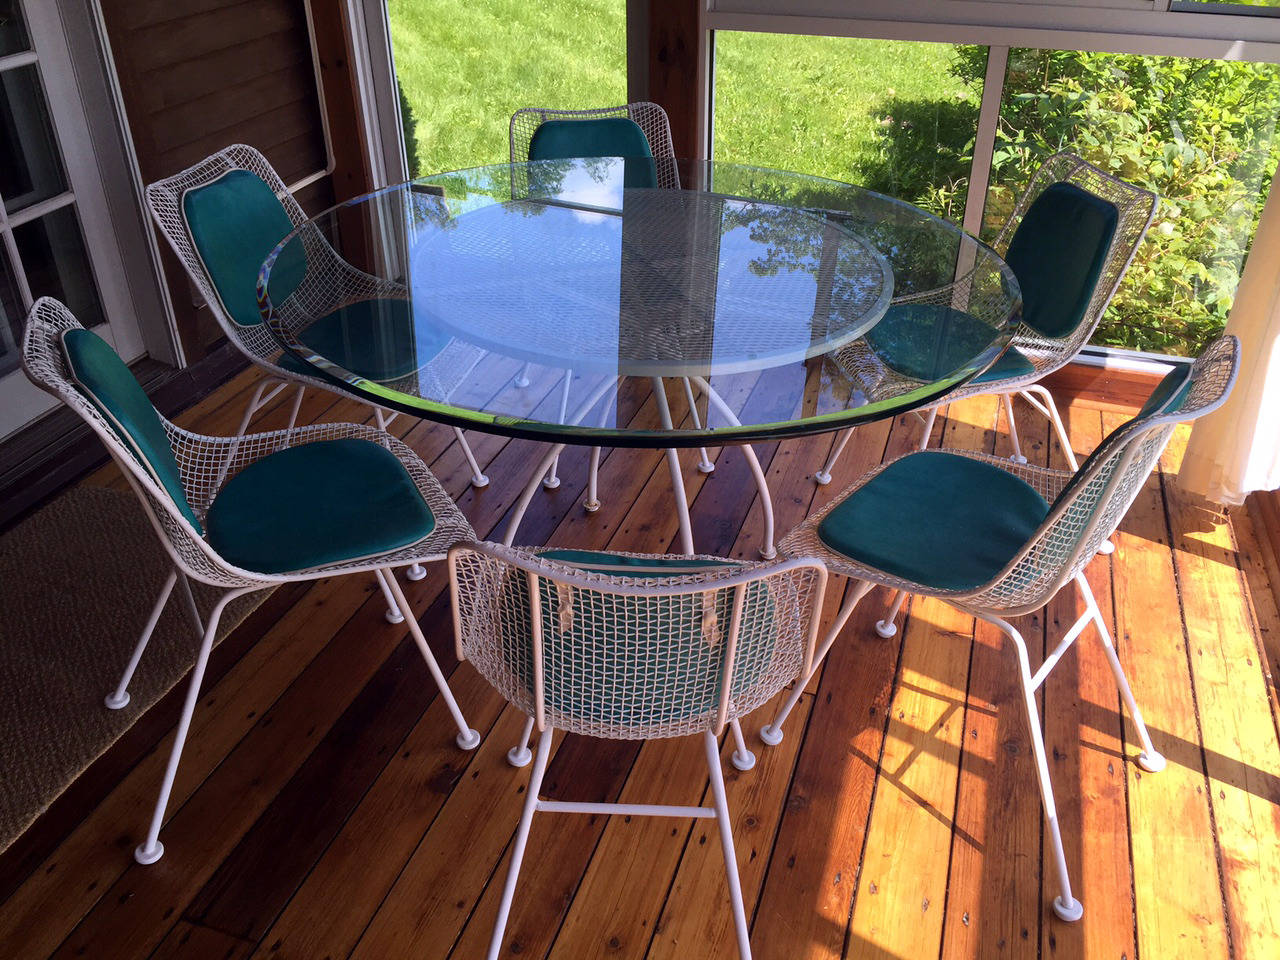 Designed by Russell Woodard and manufactured by Woodard Furniture company in Owosso, MI circa 1950s, this is a great set of a table and six side chairs (Sculptura series). Made of enameled steel mesh, newly powder-coated and with new marine grade